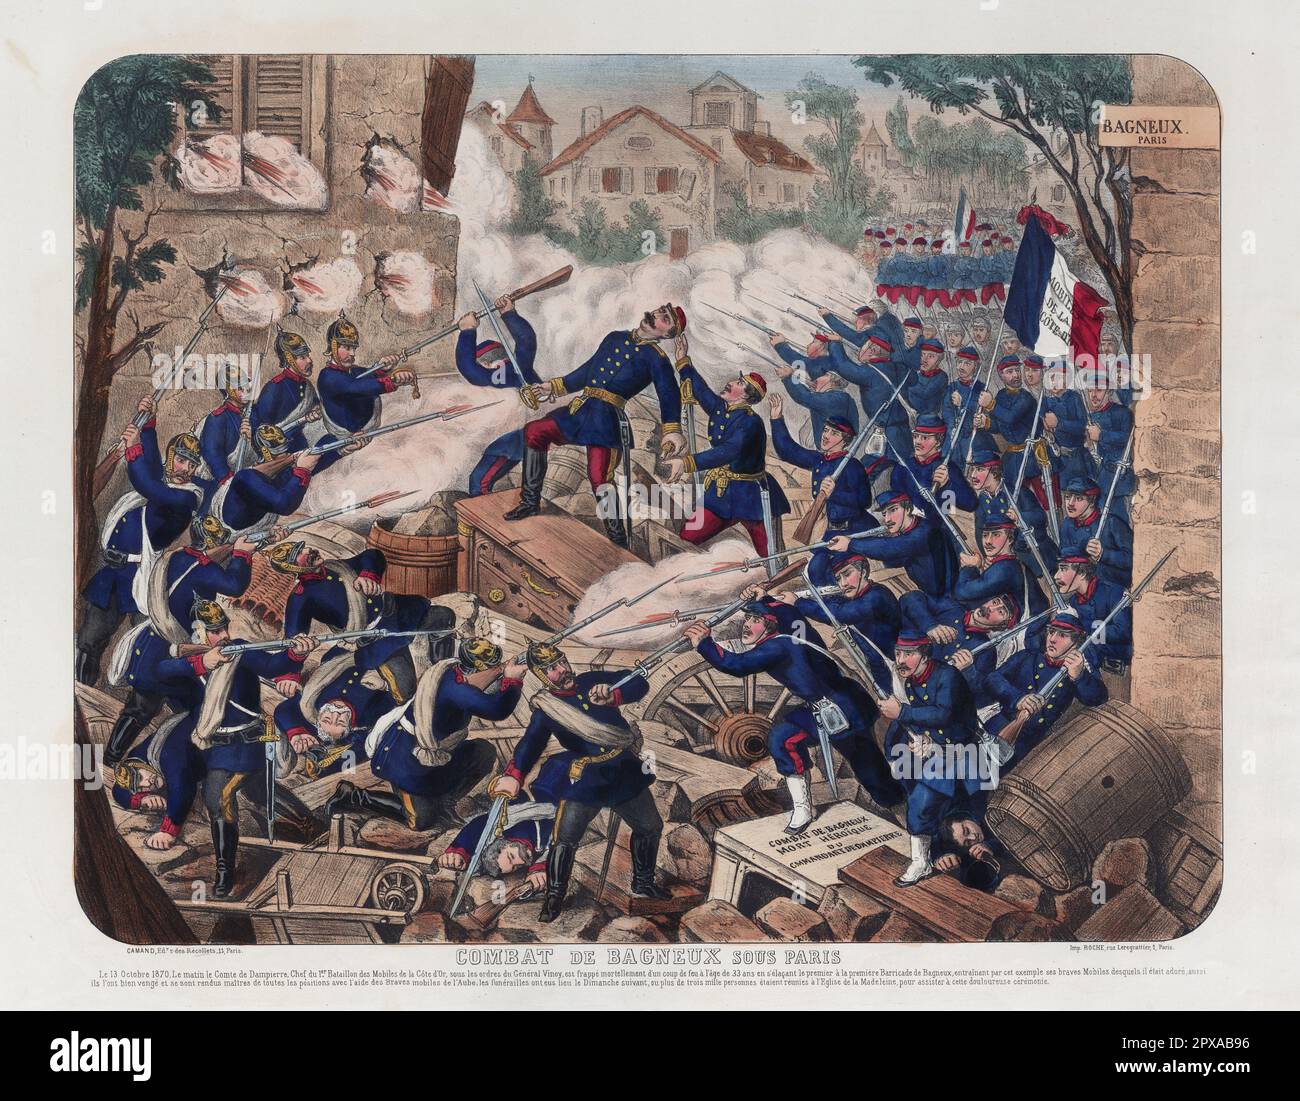 French colour engraving: Battle Of Bagneux Under Paris: On October 13, 1870, Death of Count of Dampierre, Leader of the 1st Battalion of the Mobiles of the Côte d'Or... Stock Photo